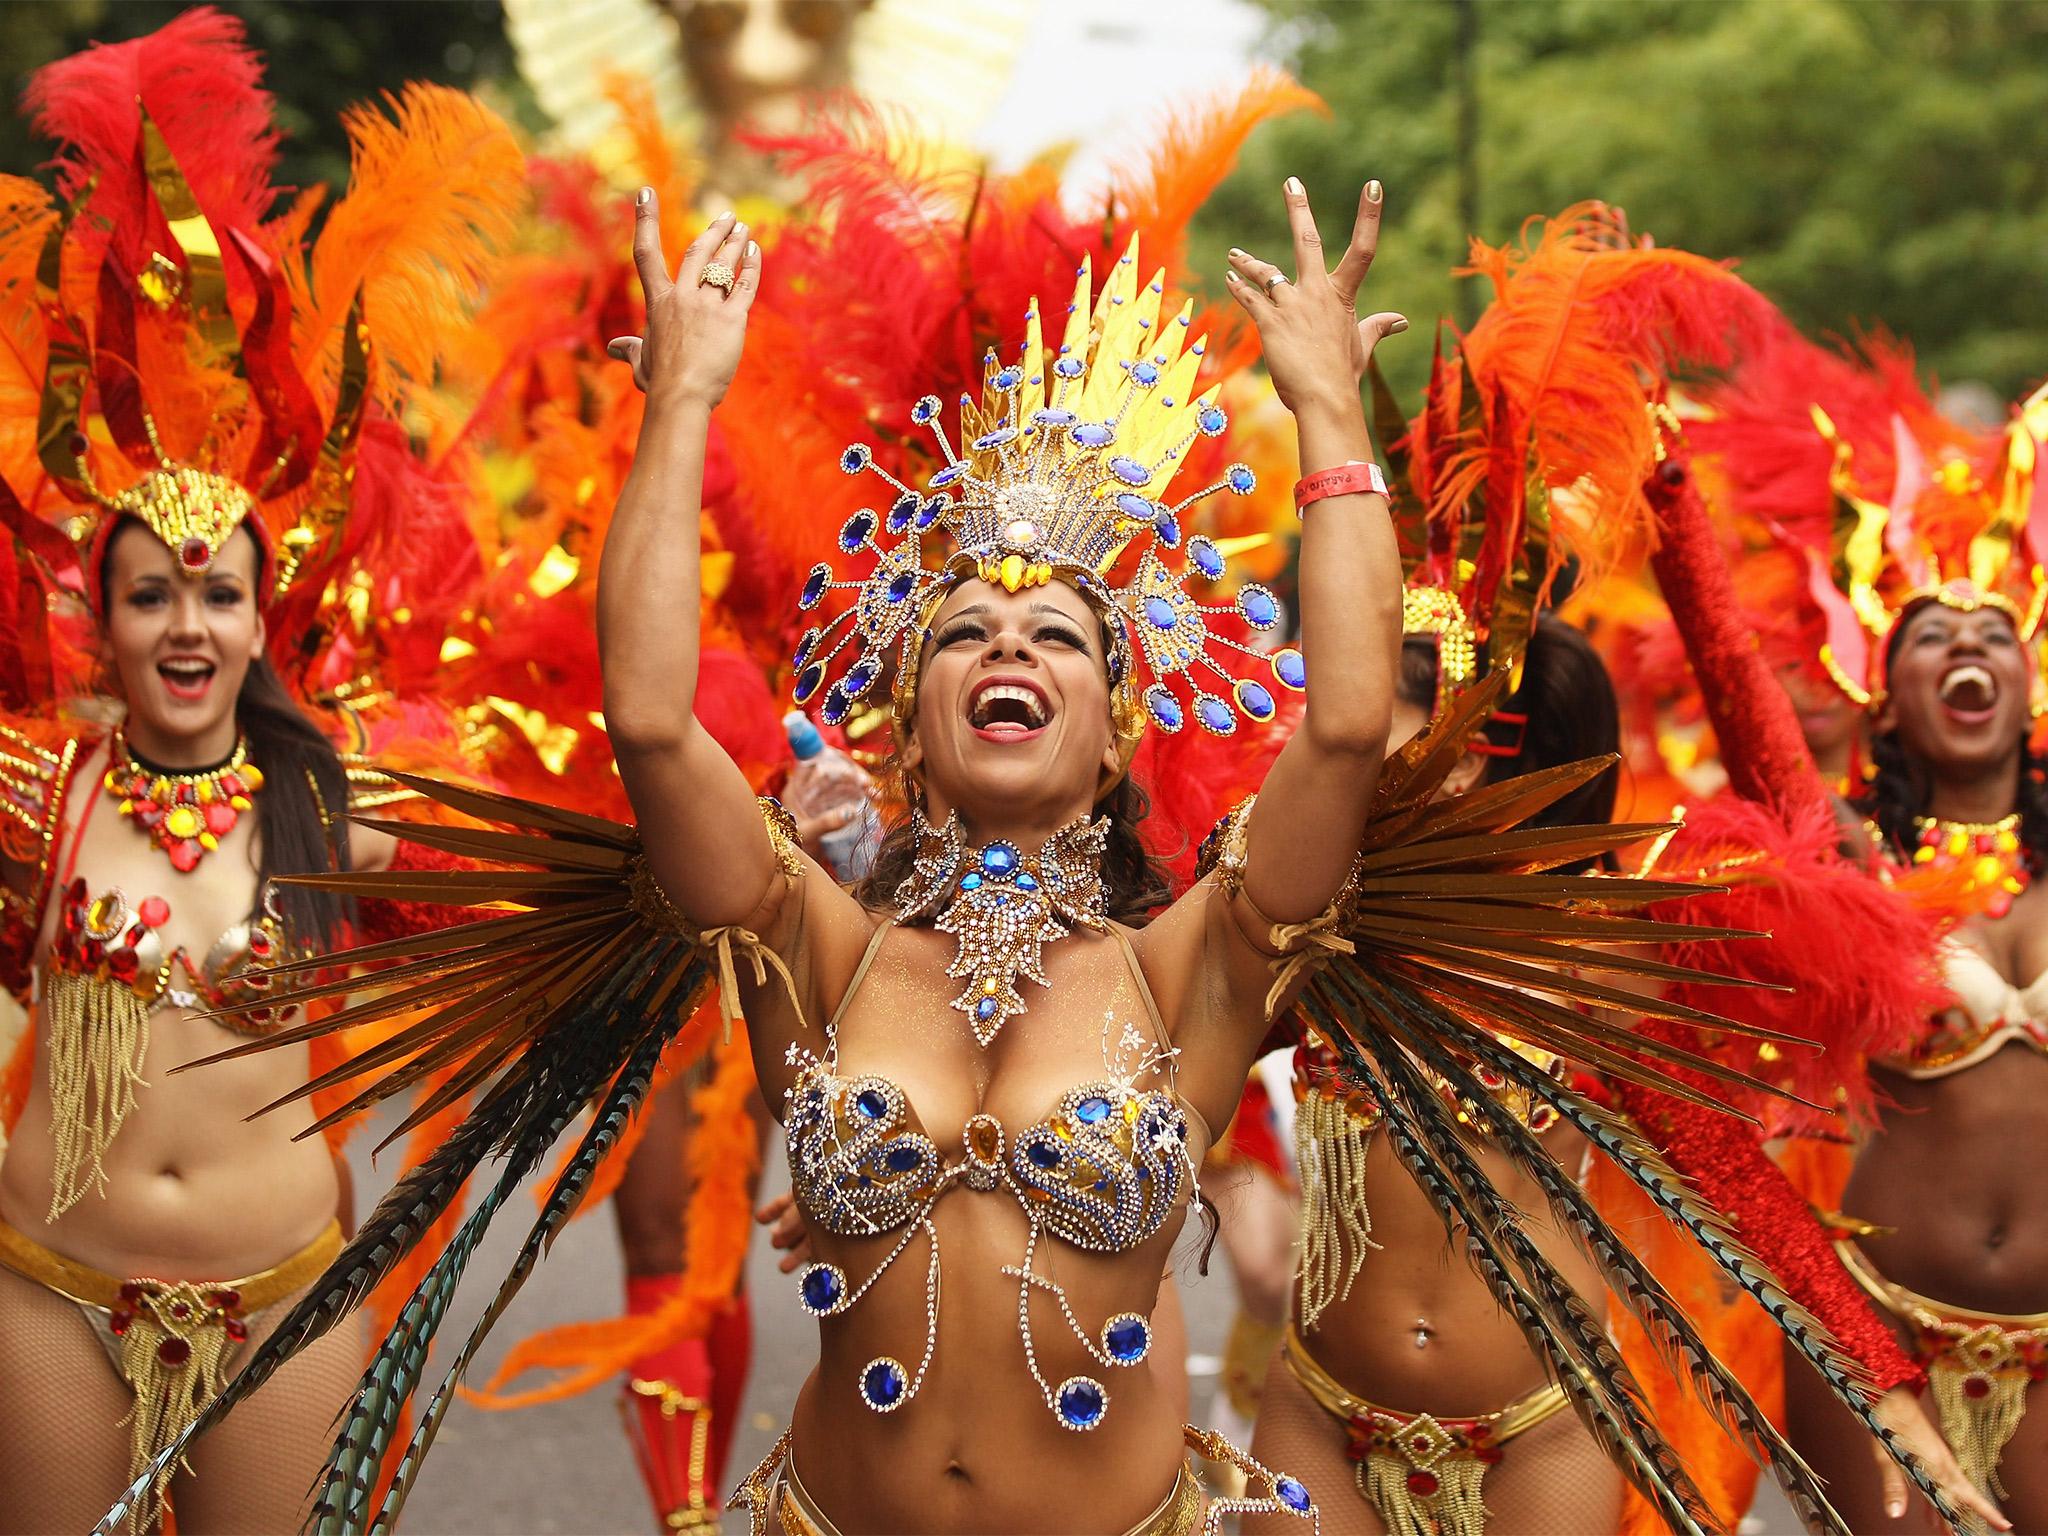 Notting Hill Carnival organisers want media groups to pay for reporters and photographers to cover this weekend’s event